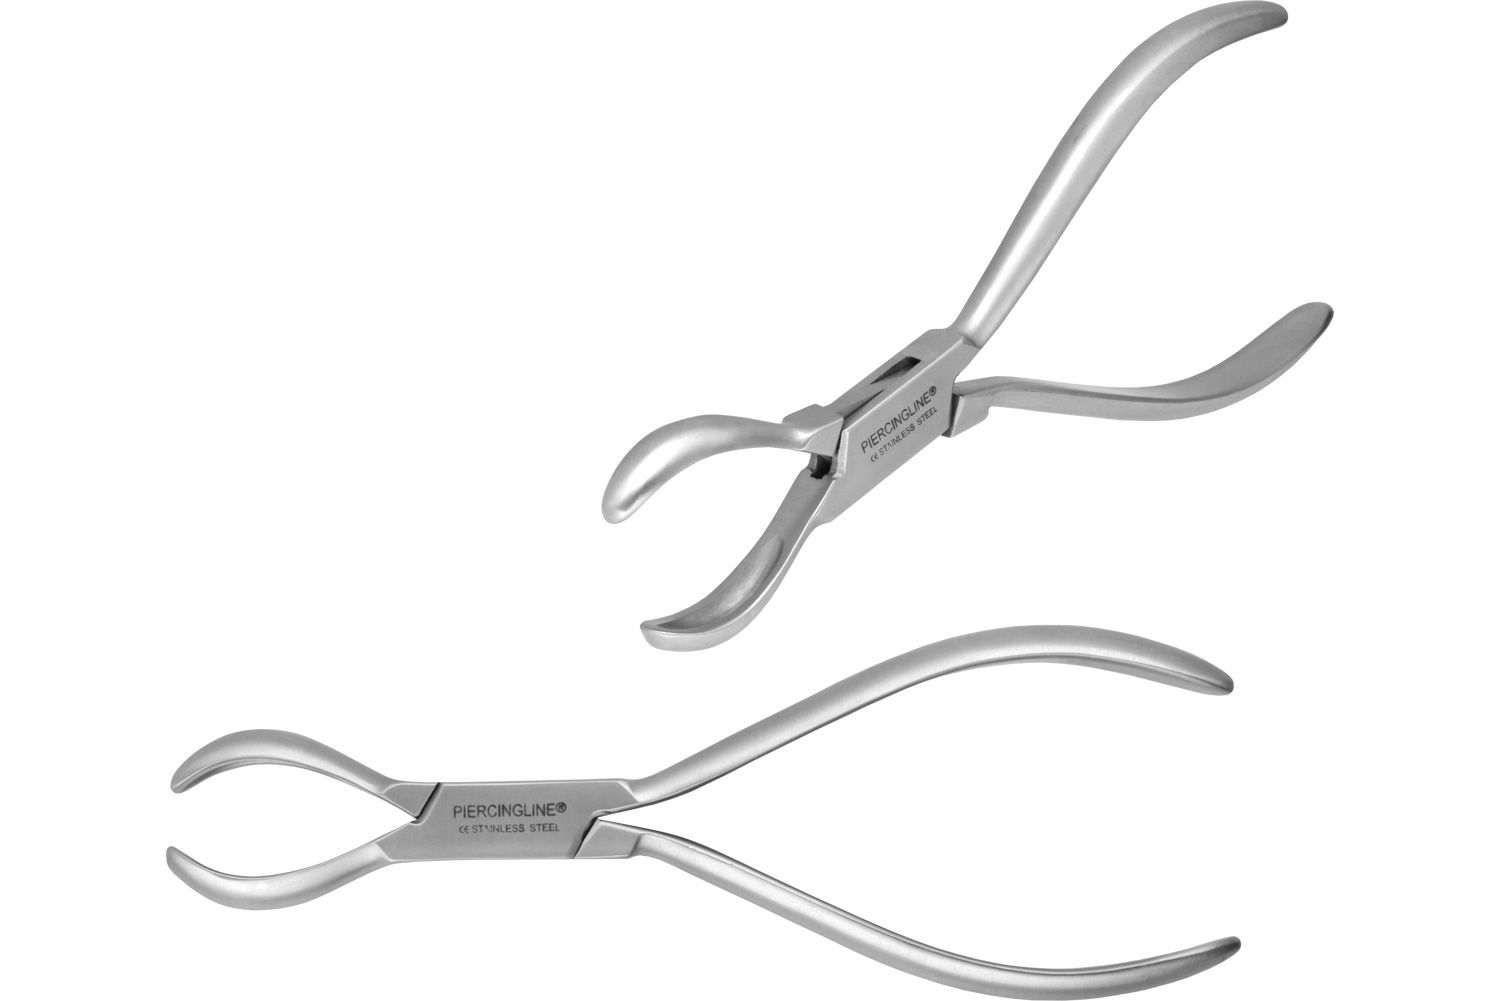 Stainless steel ring closing pliers BIG